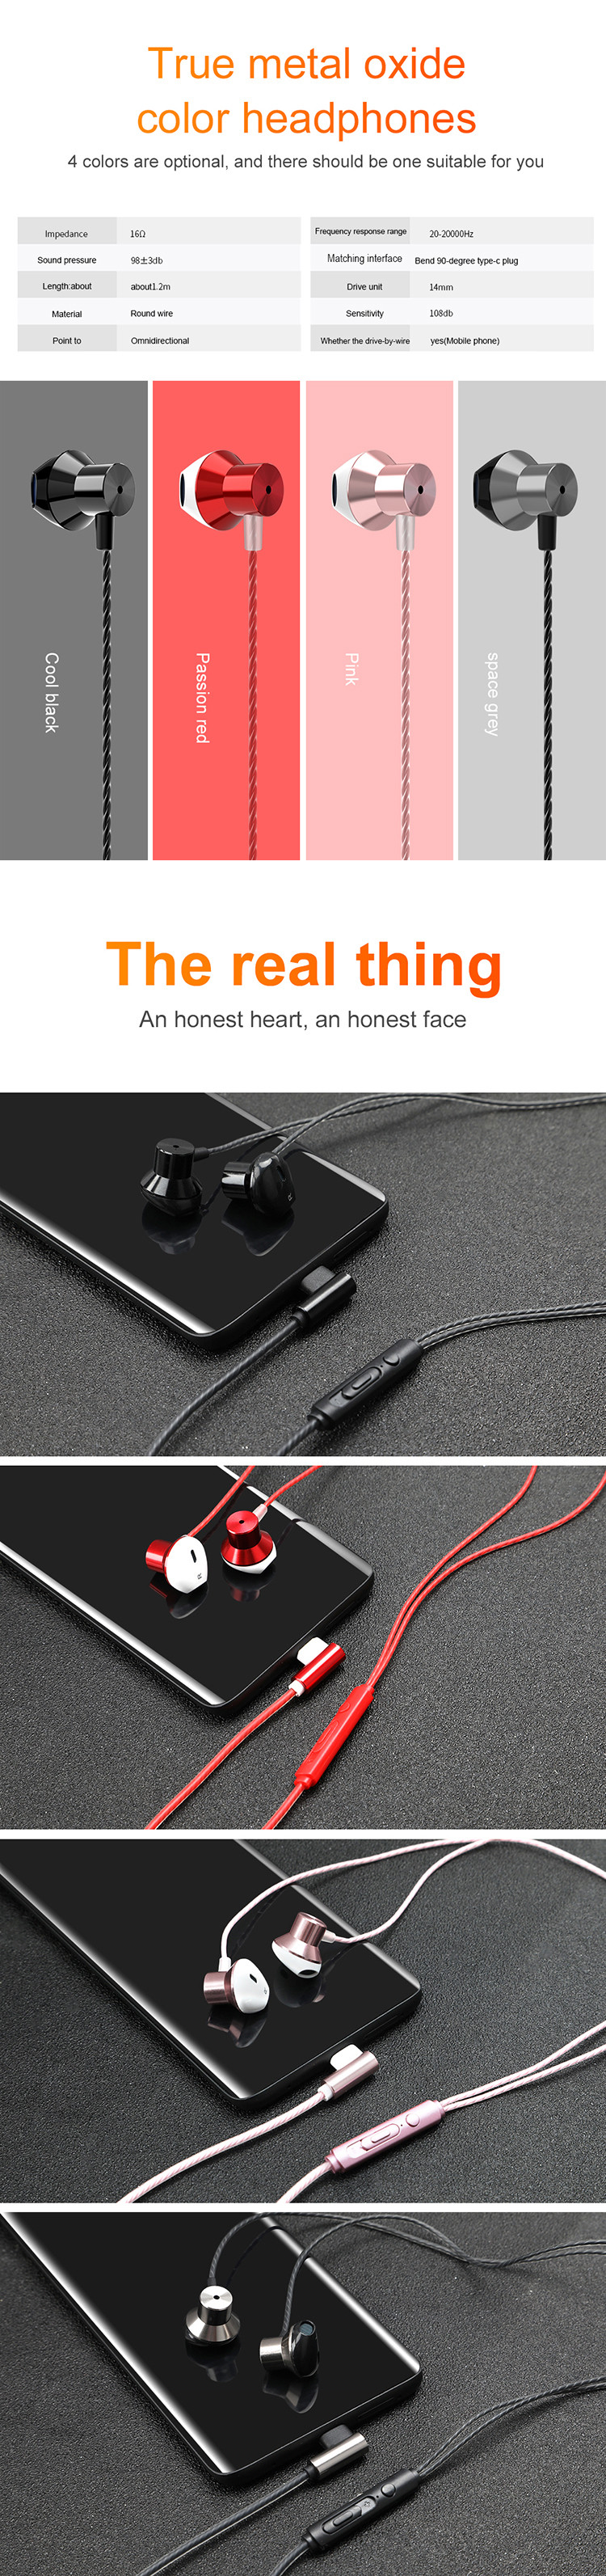 F13-Type-c-Wired-Earphone-Hifi-Bass-Metal-Sport-In-ear-Headset-Music-Gaming-Earphone-with-Mic-for-On-1515937-6